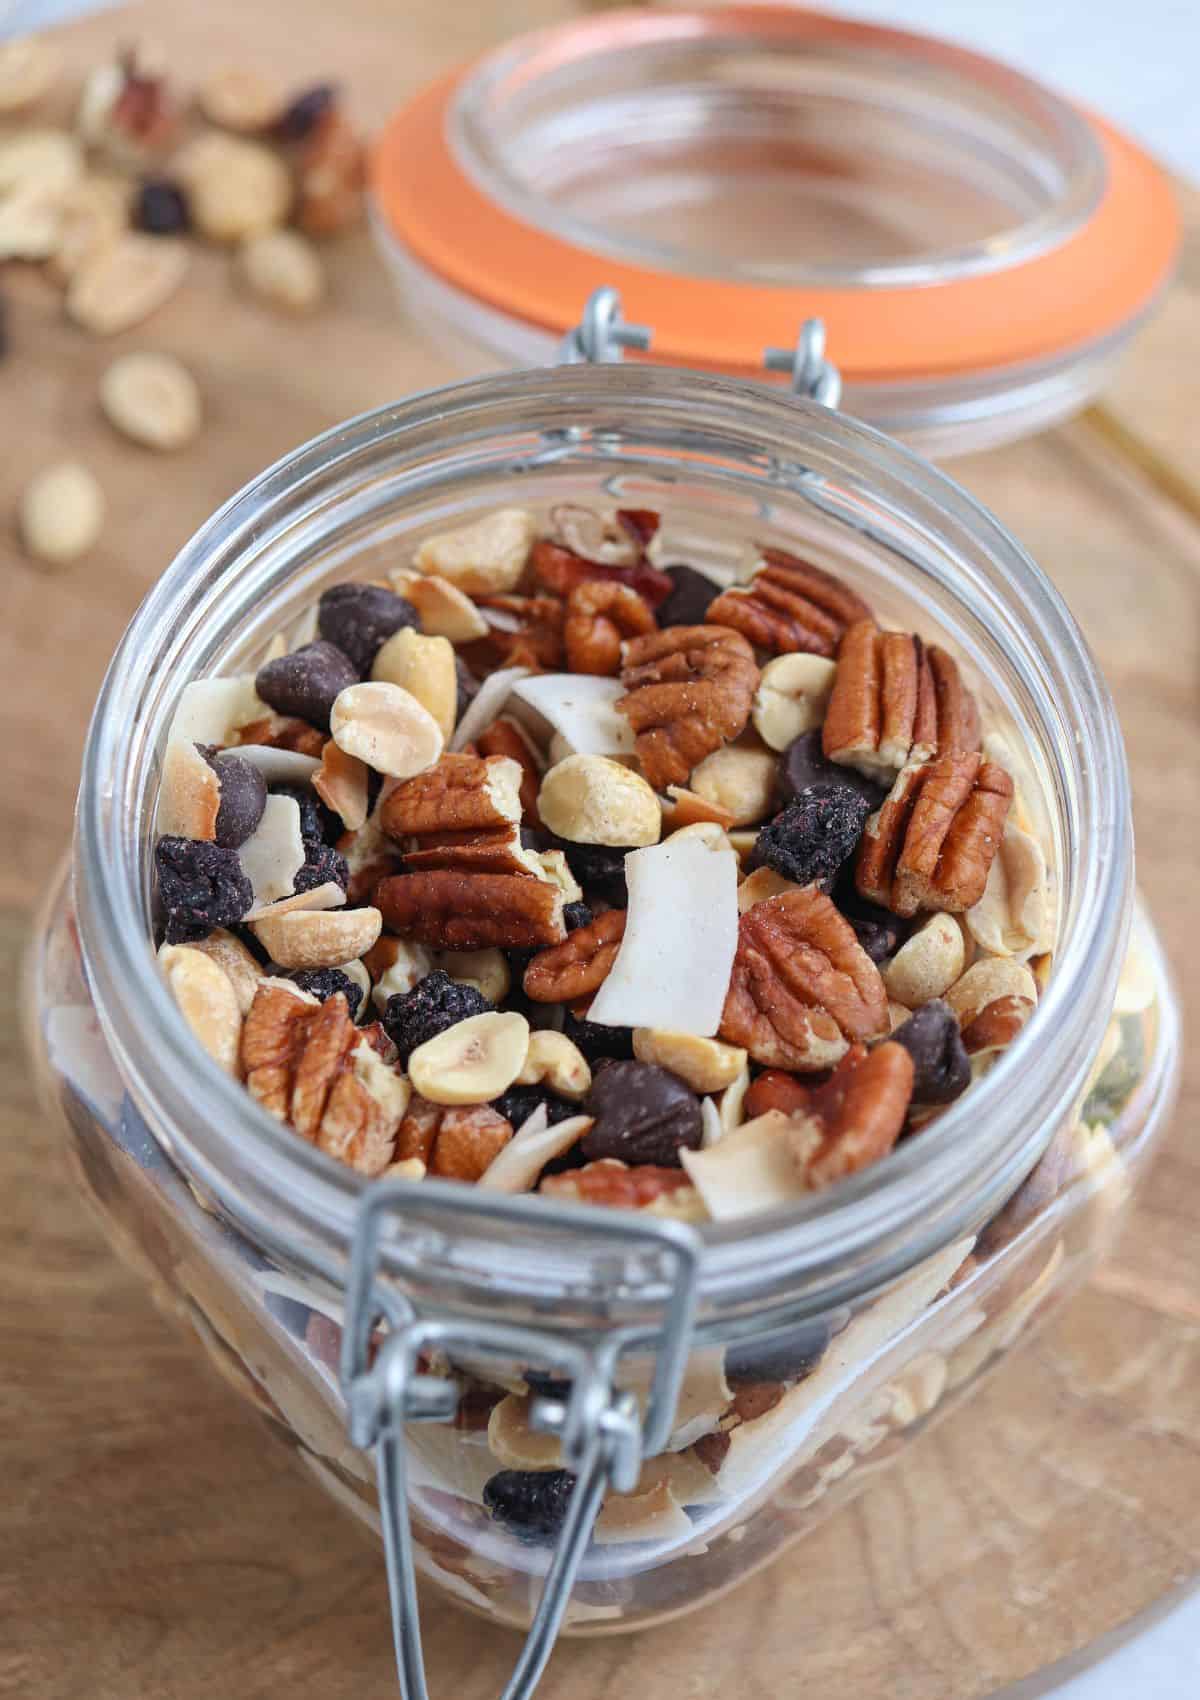 A glass jar on a wooden surface contains a blend of nuts, dried fruits, and chocolate chips, surrounded by scattered mix and an open orange lid.